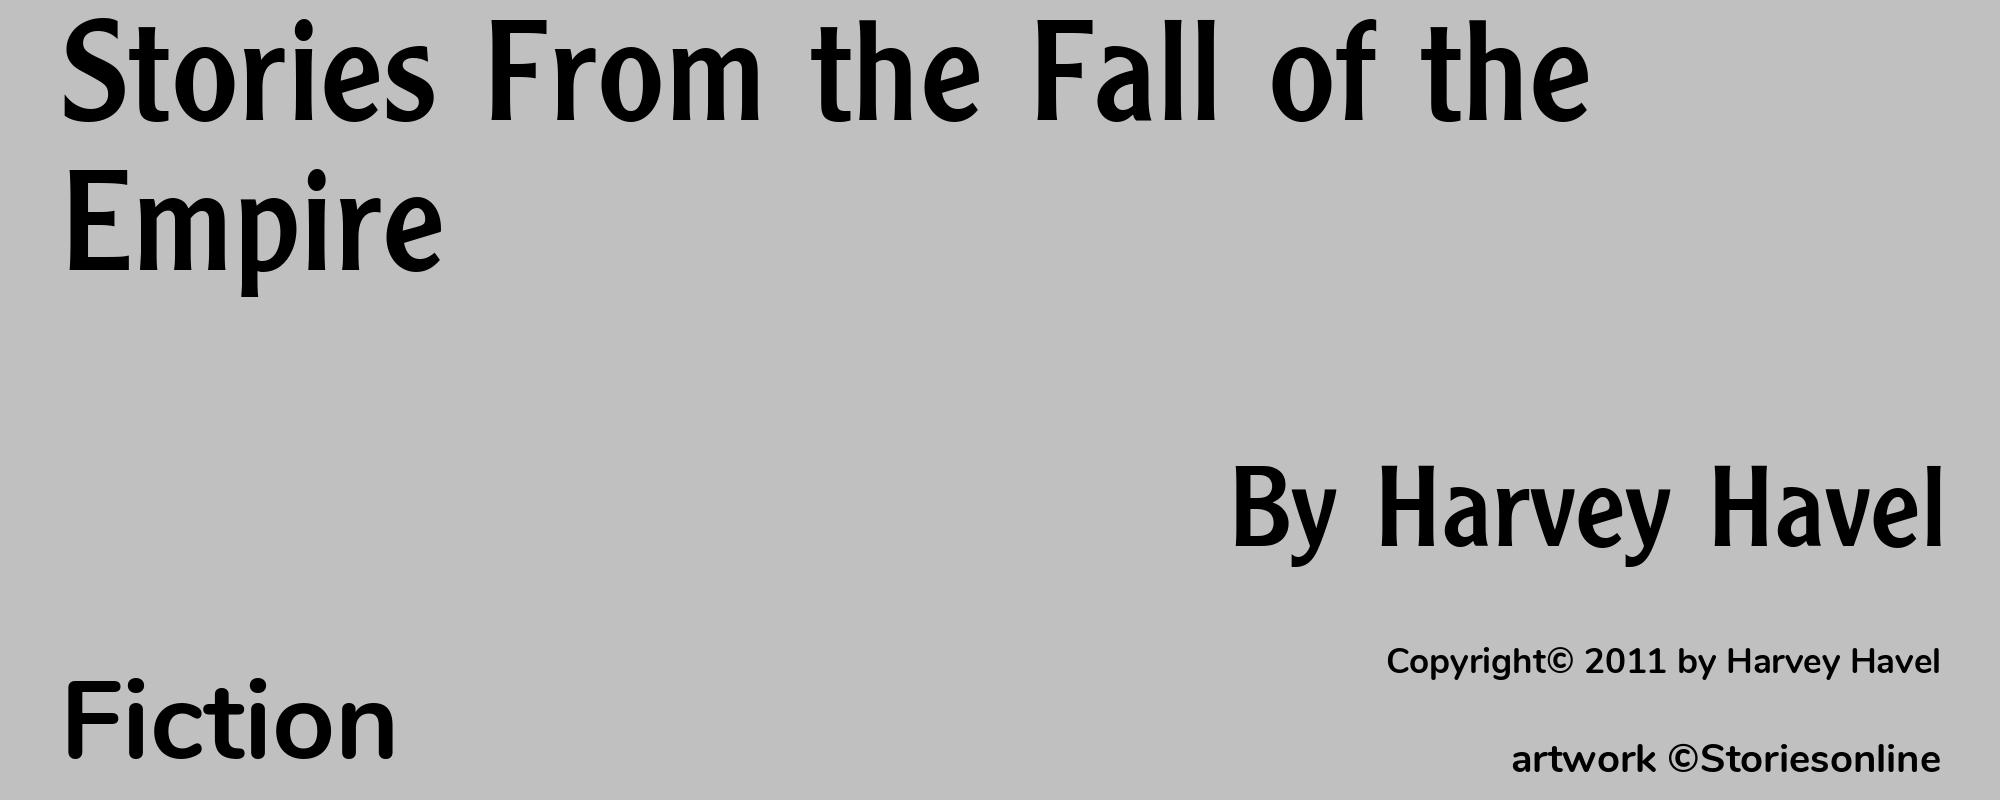 Stories From the Fall of the Empire - Cover